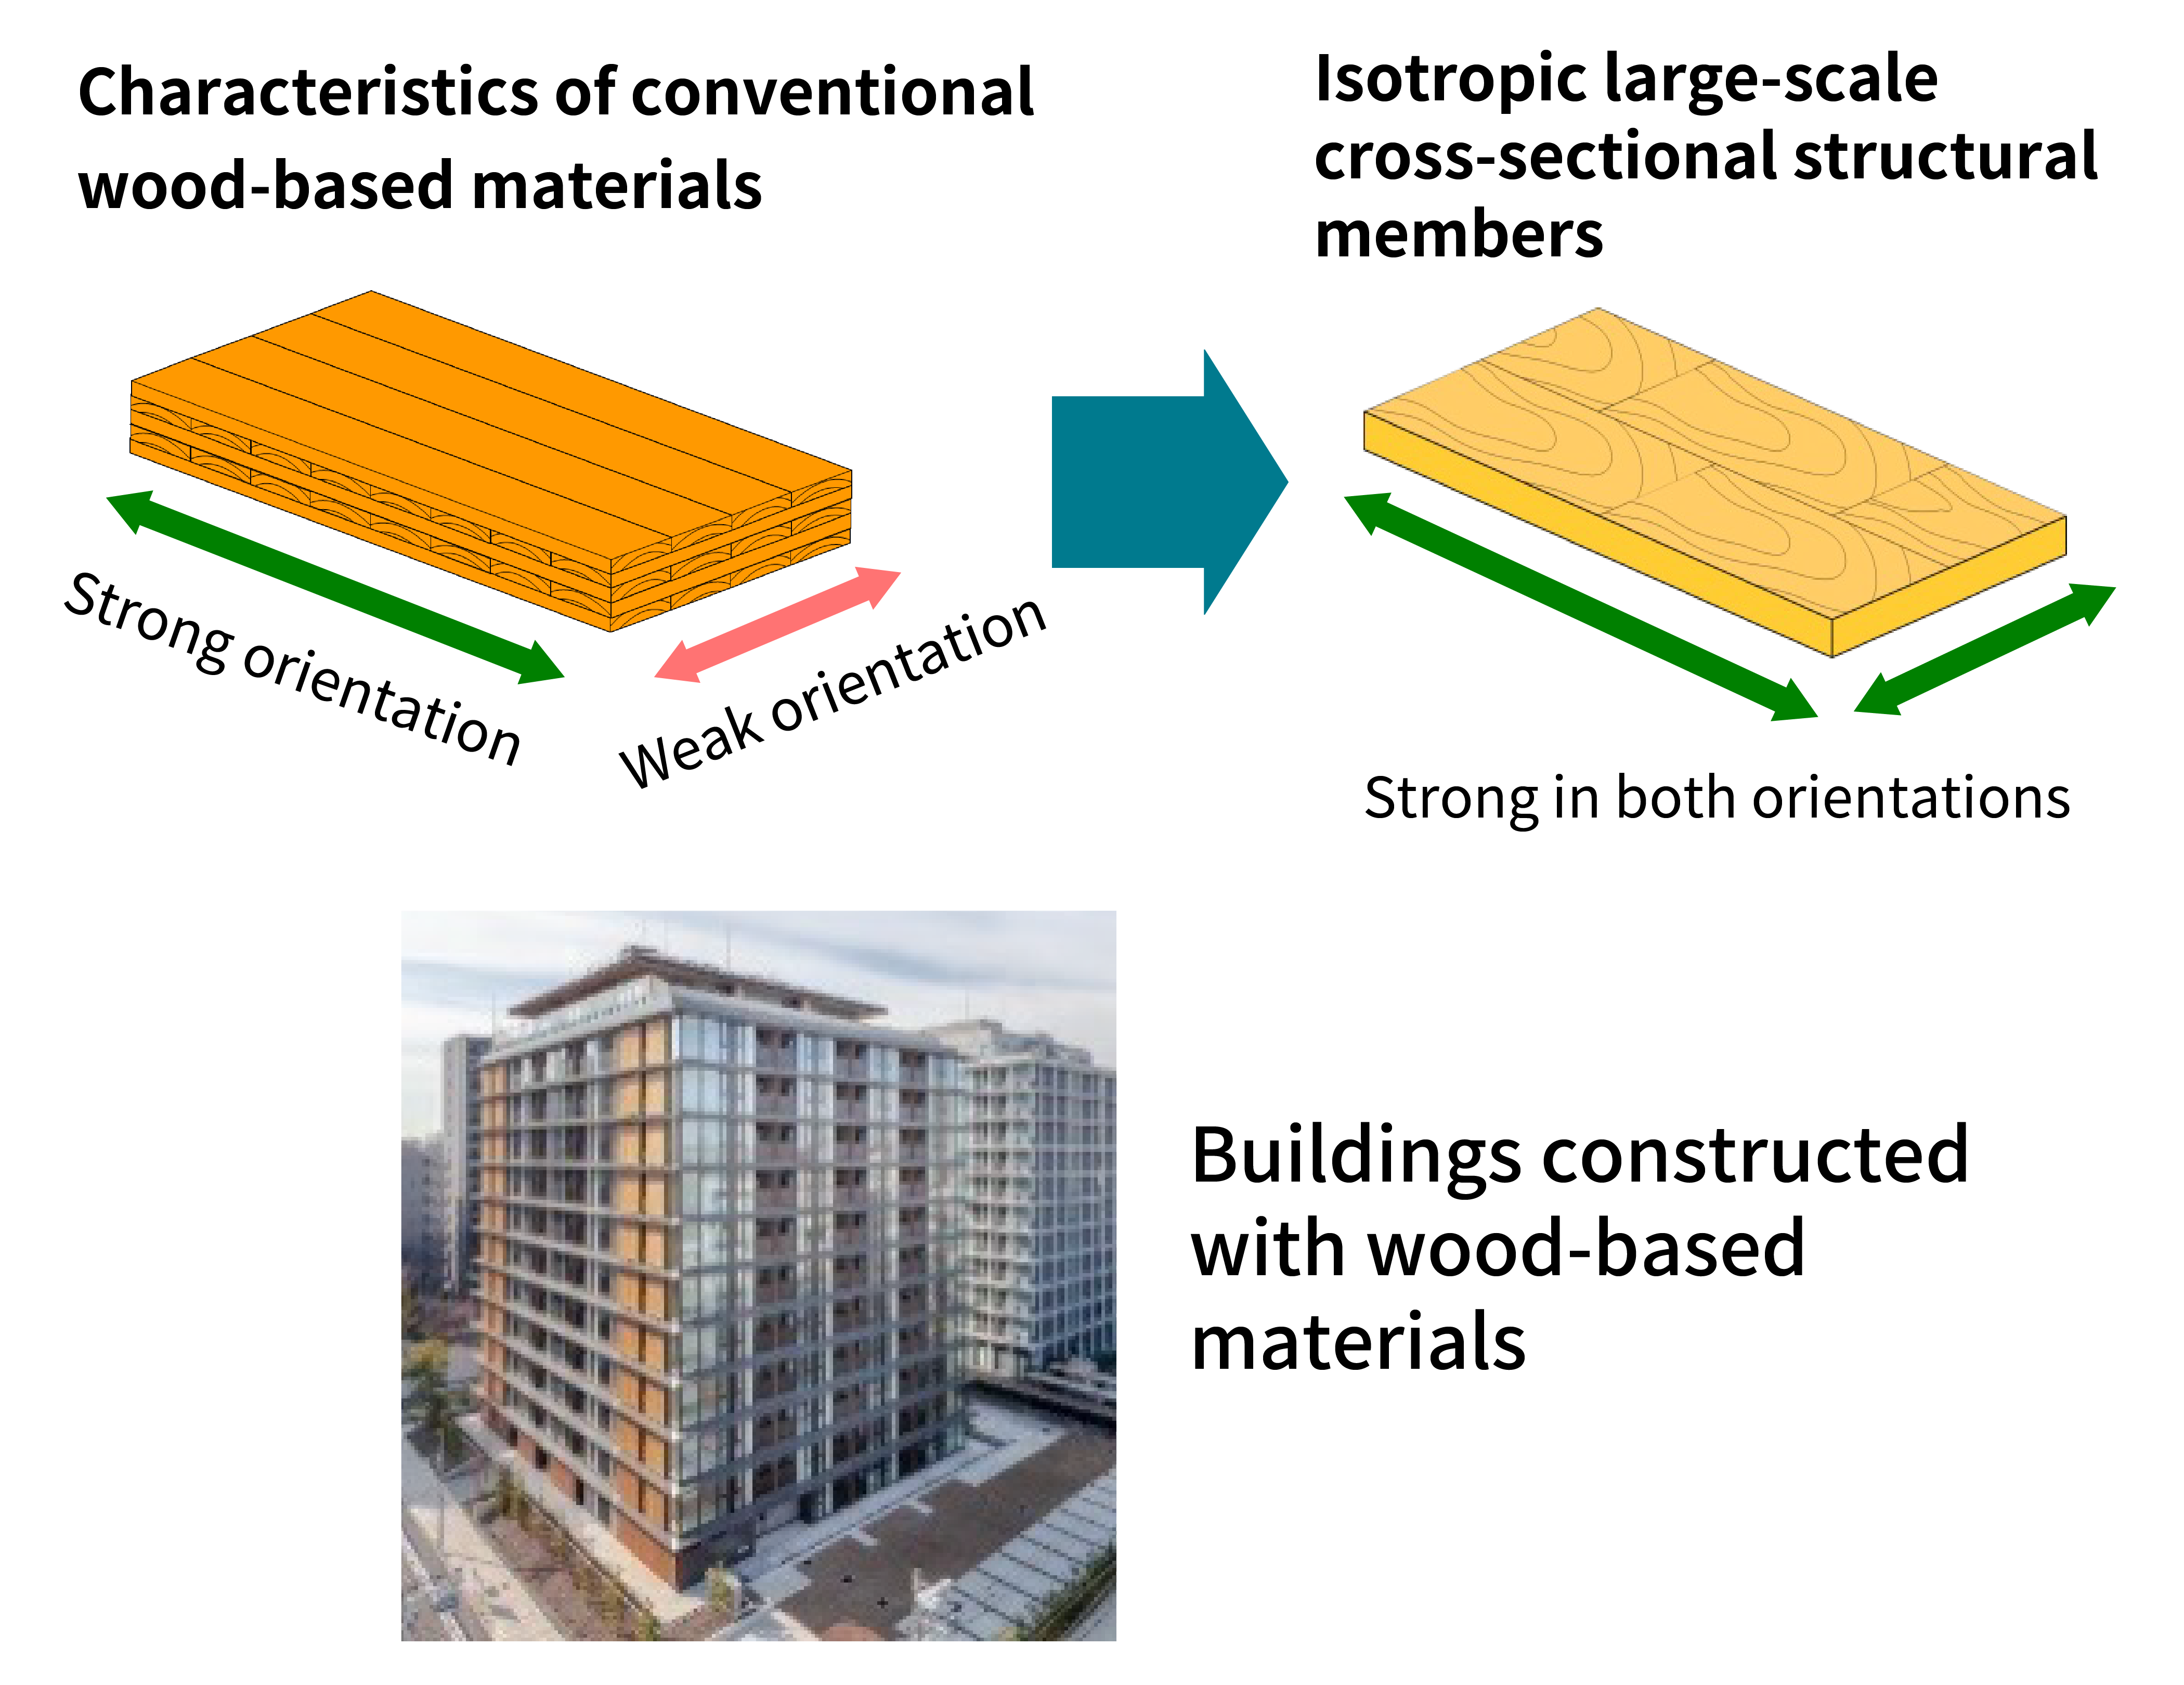 〇 Development of wood-based isotropic large-scale cross-sectional structural members for the construction of high-rise buildings and other structures